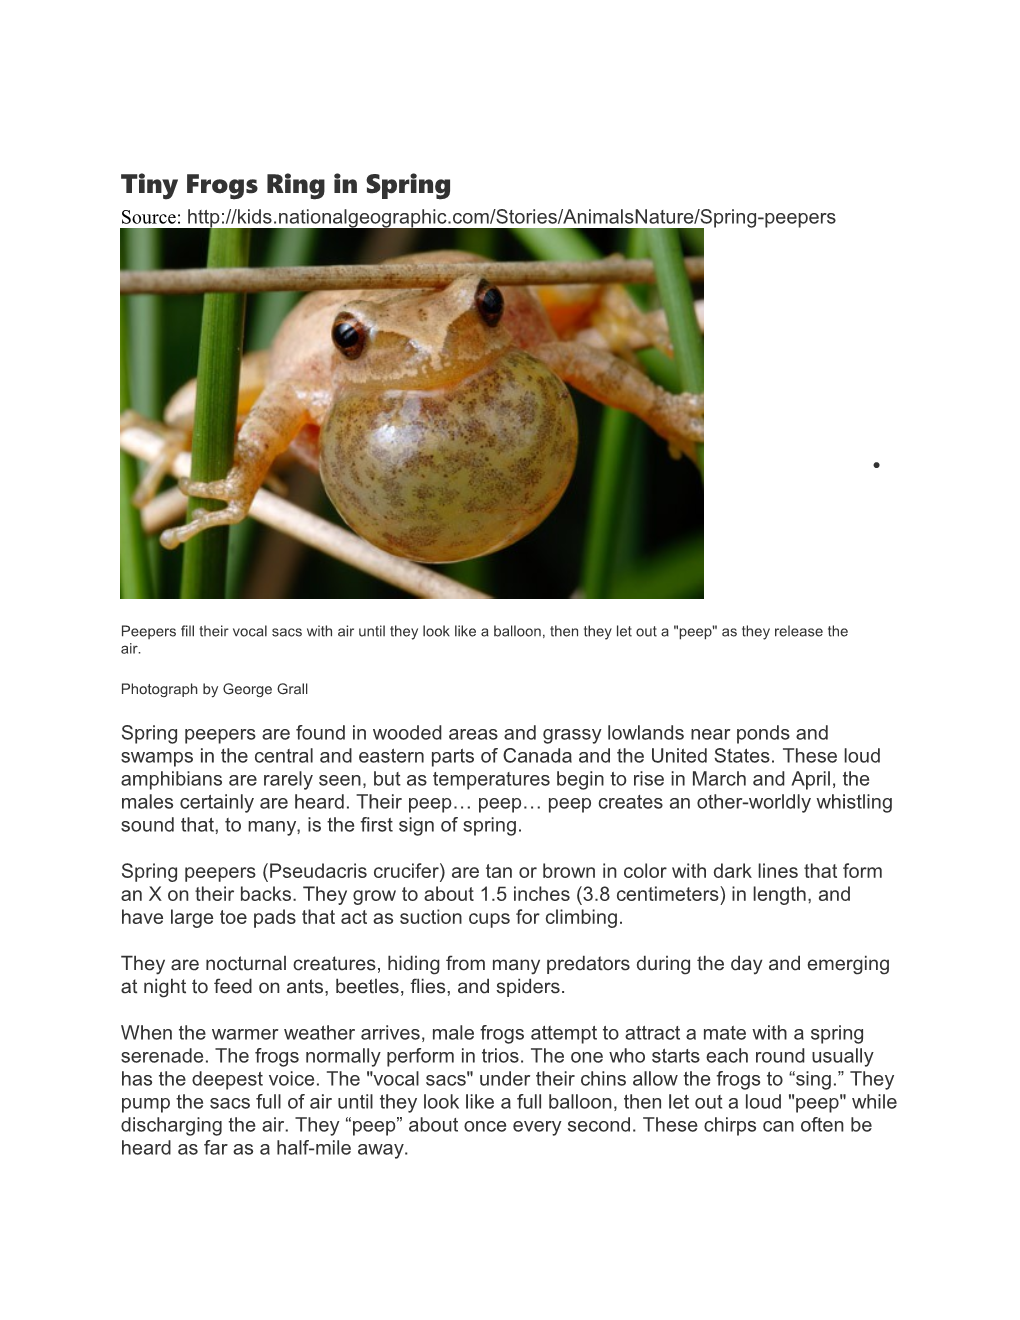 Tiny Frogs Ring in Spring